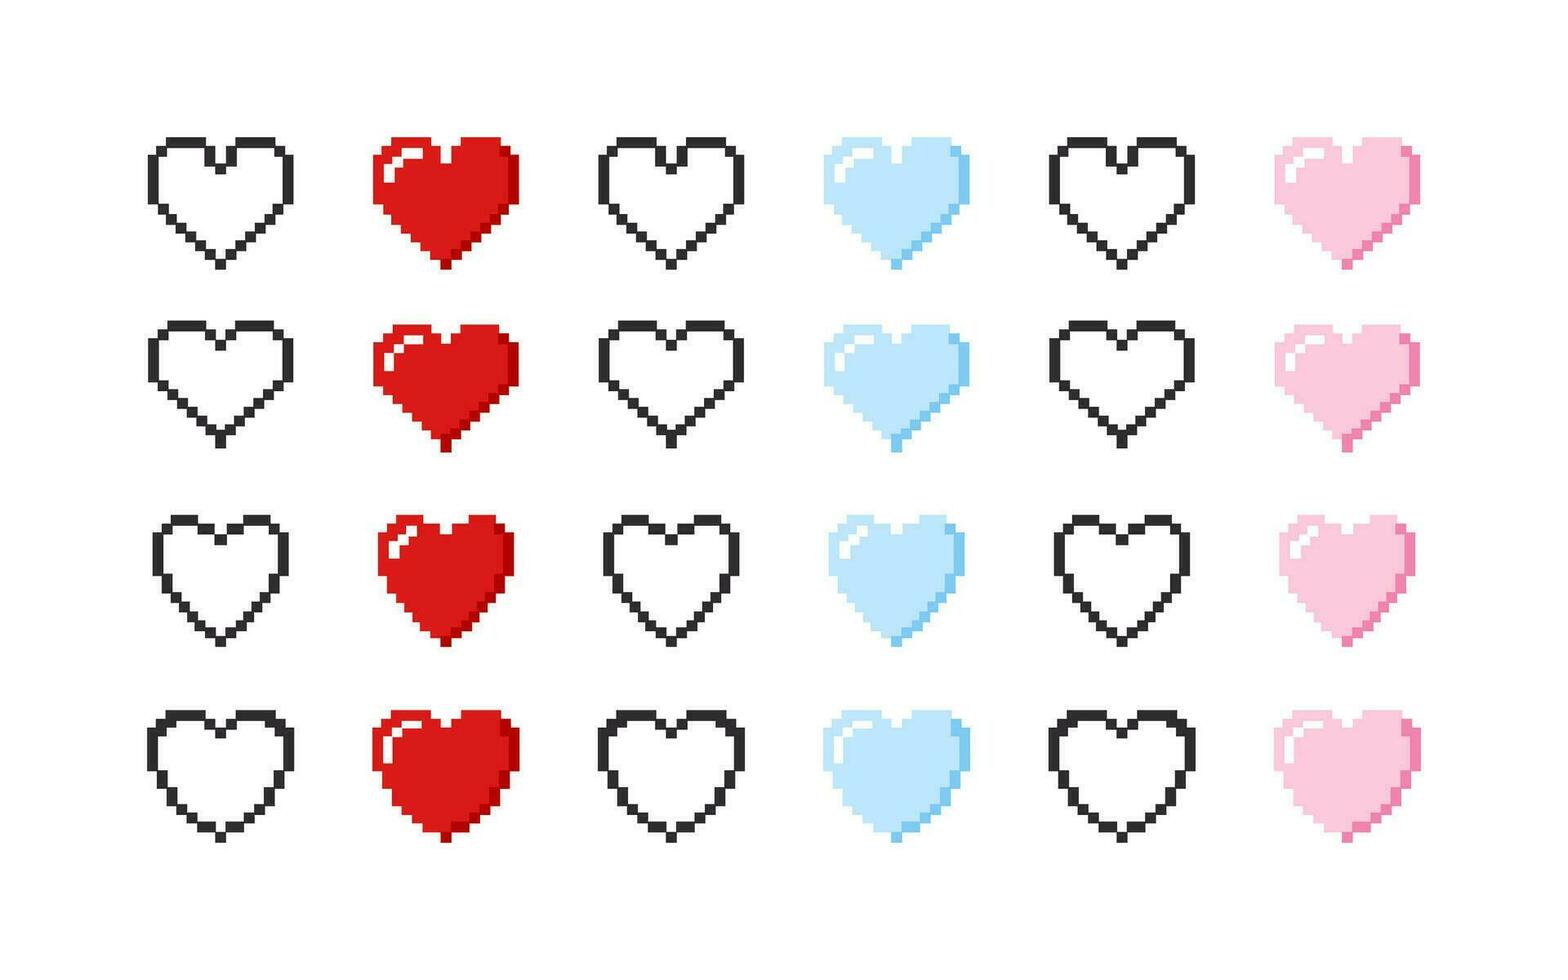 Icons of hearts. Set of hearts icons in pixel style. Vector scalable graphics